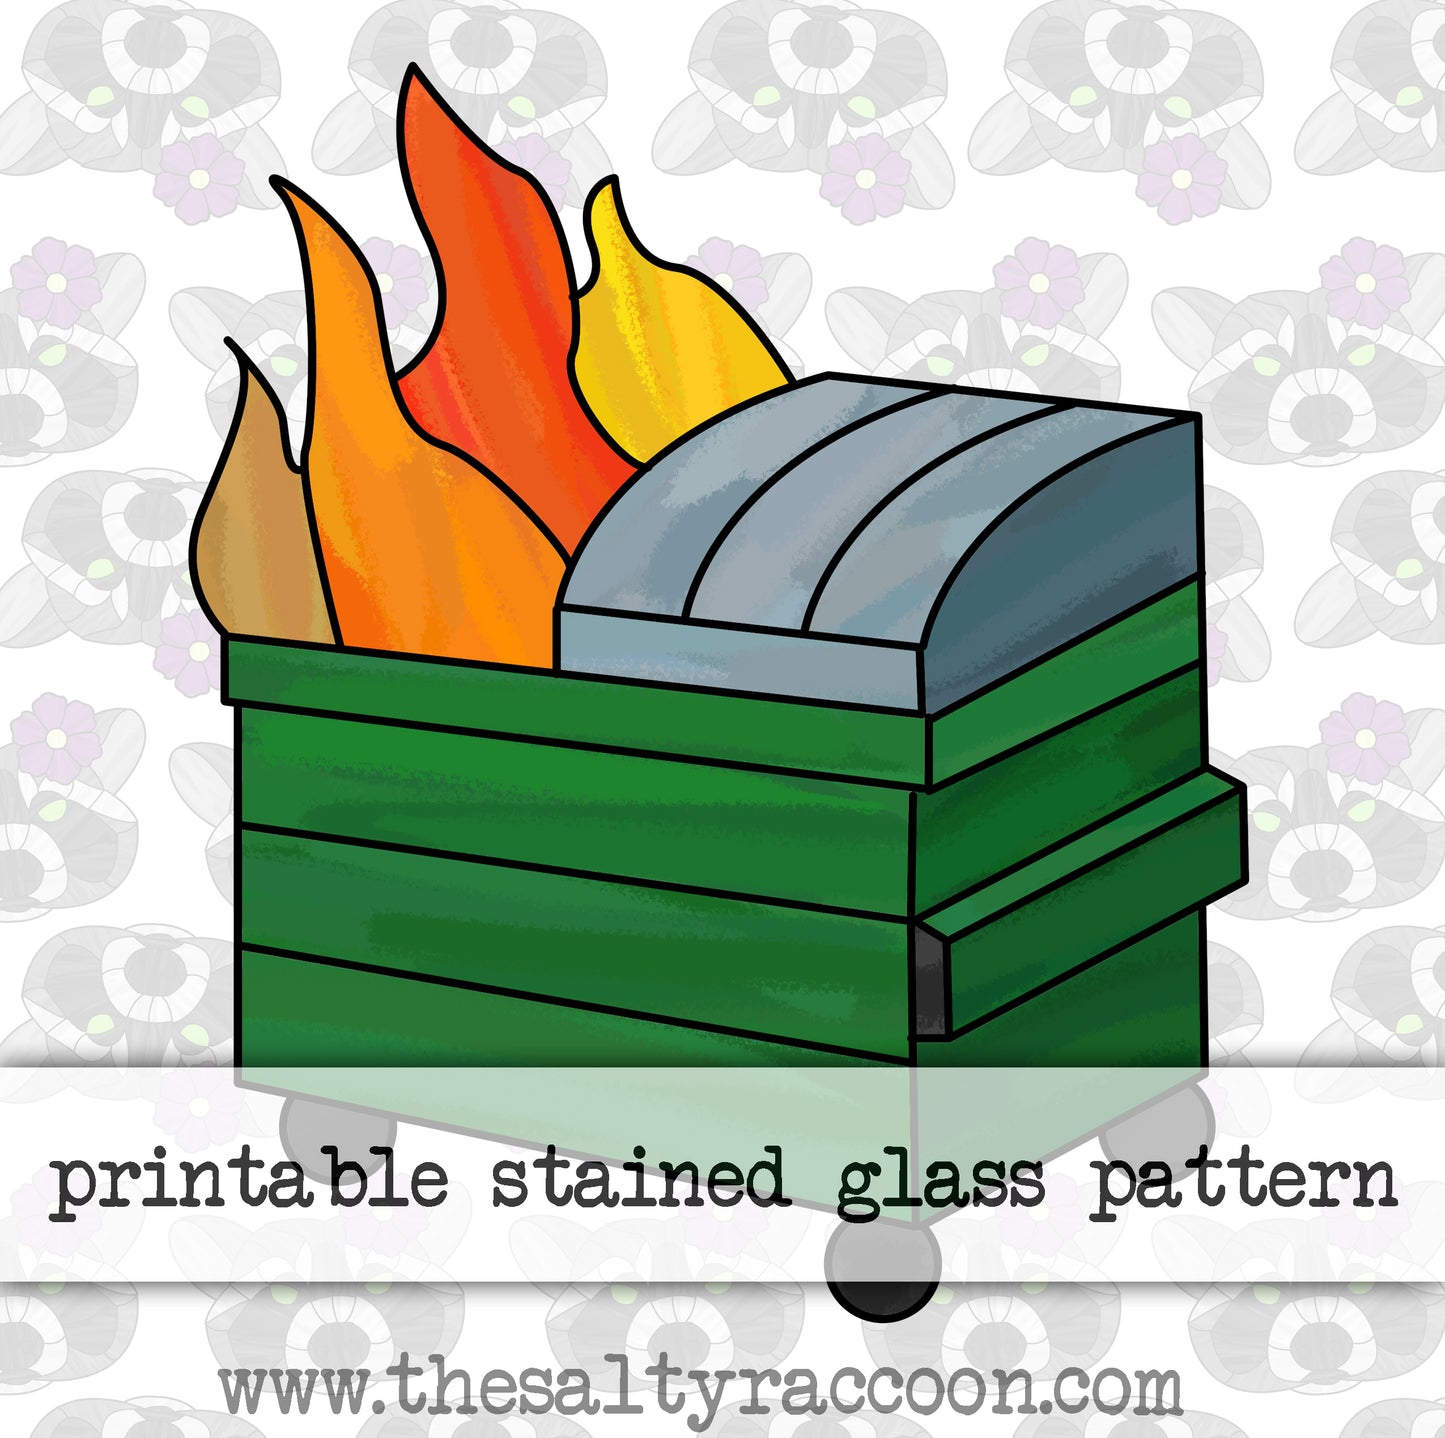 Dumpster Fire Digital Stained Glass Pattern - Includes Printable Pages and Cricut PNG File